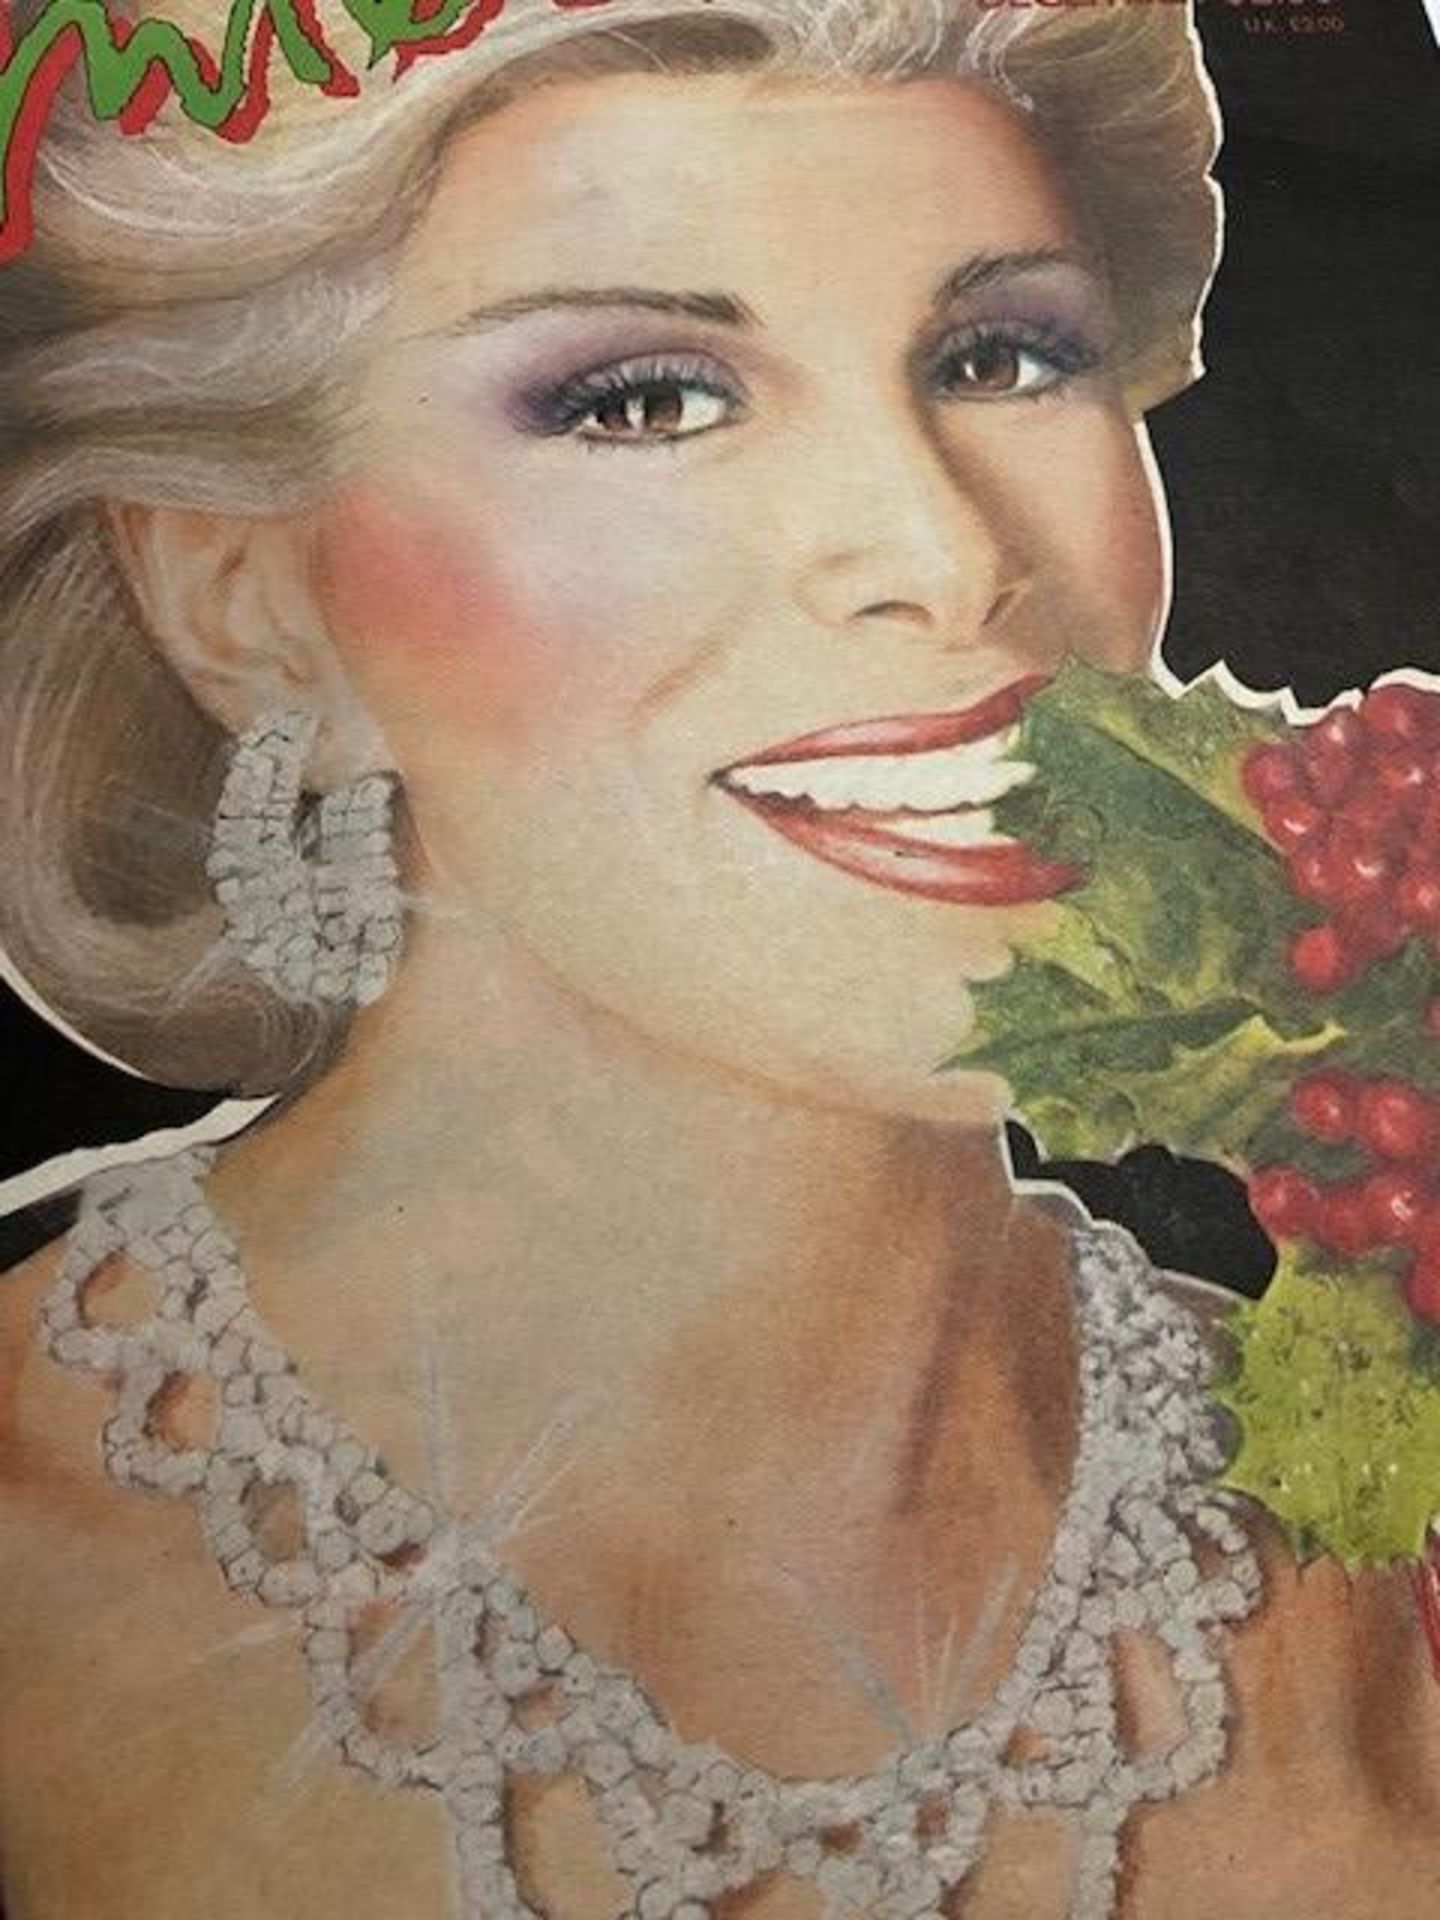 Andy Warhol" JOAN RIVERS" Hand Signed Interview Magazine Cover - Image 2 of 6